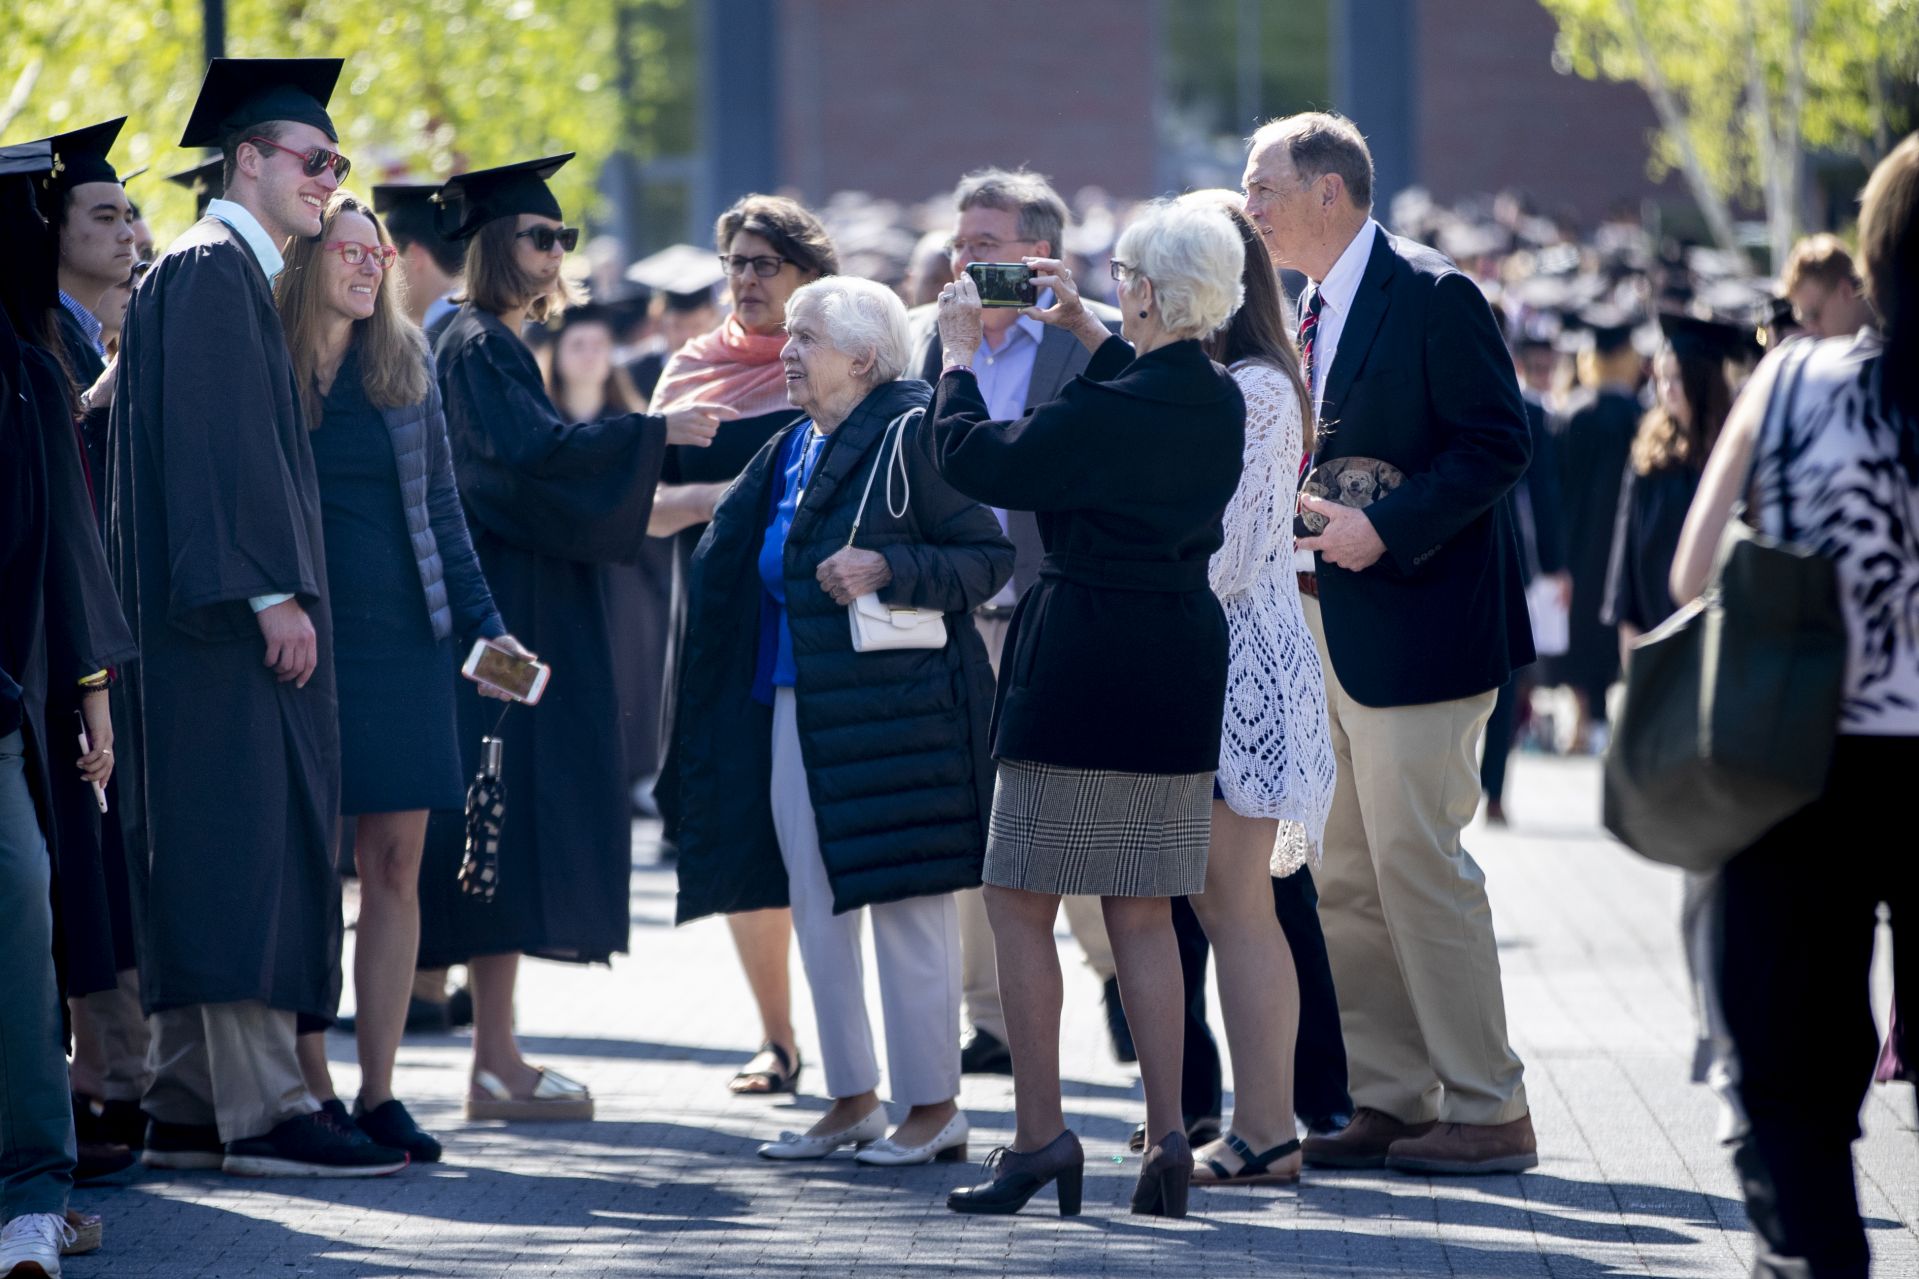 Bates College 2019 Commencement (the one hundred and fifty-third) on the Historic Quad, at which Travis Mills receives an Doctor of Humane Letter. Placing the collar on Mills is the college's mace bearer, Charles Franklin Phillips Professor of EconomicsMichael Murray.